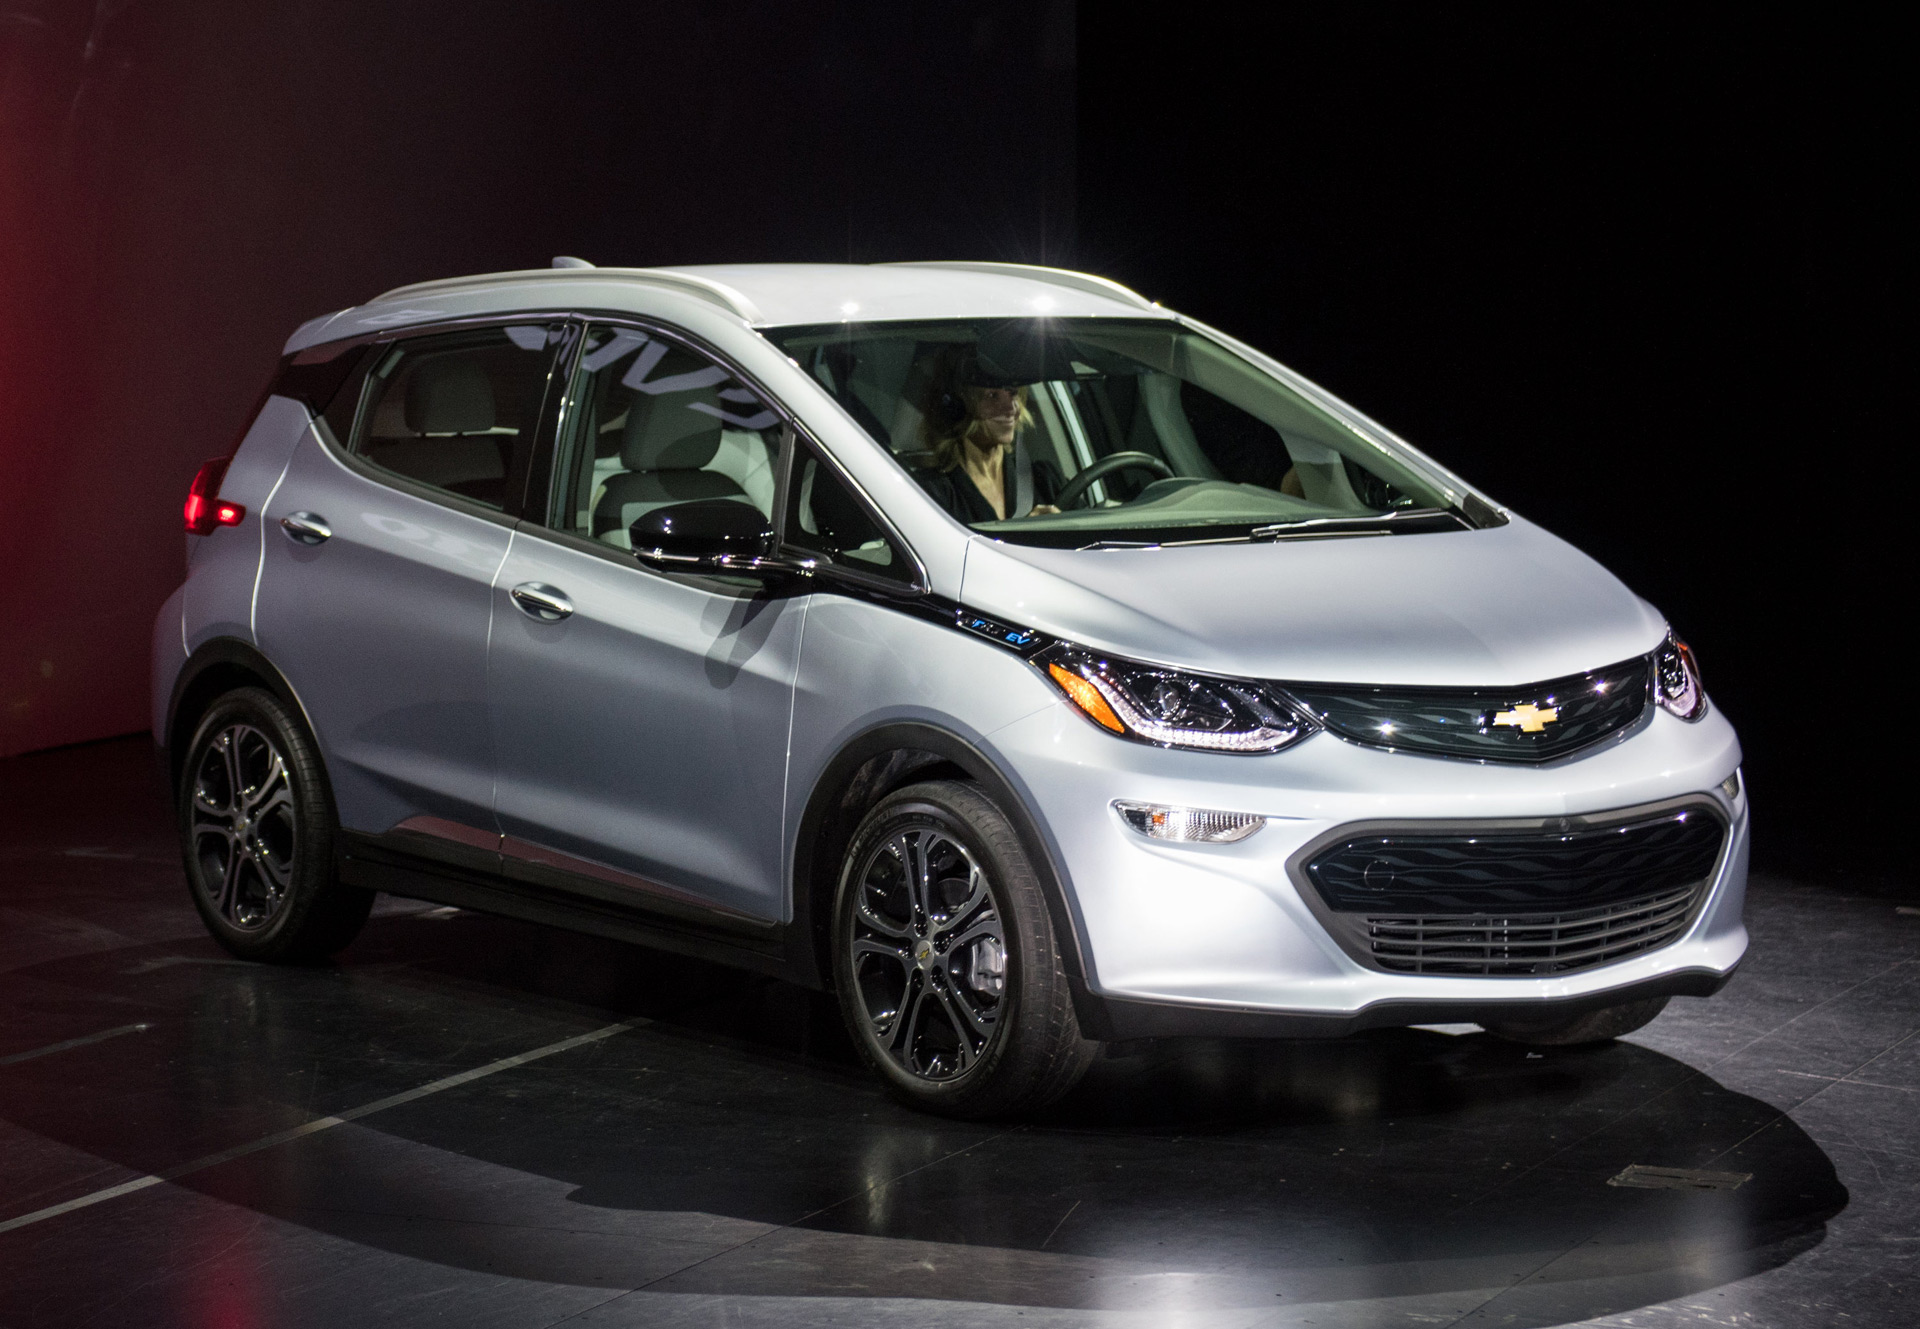 2017 Chevy Bolt all-electric vehicle currently in production